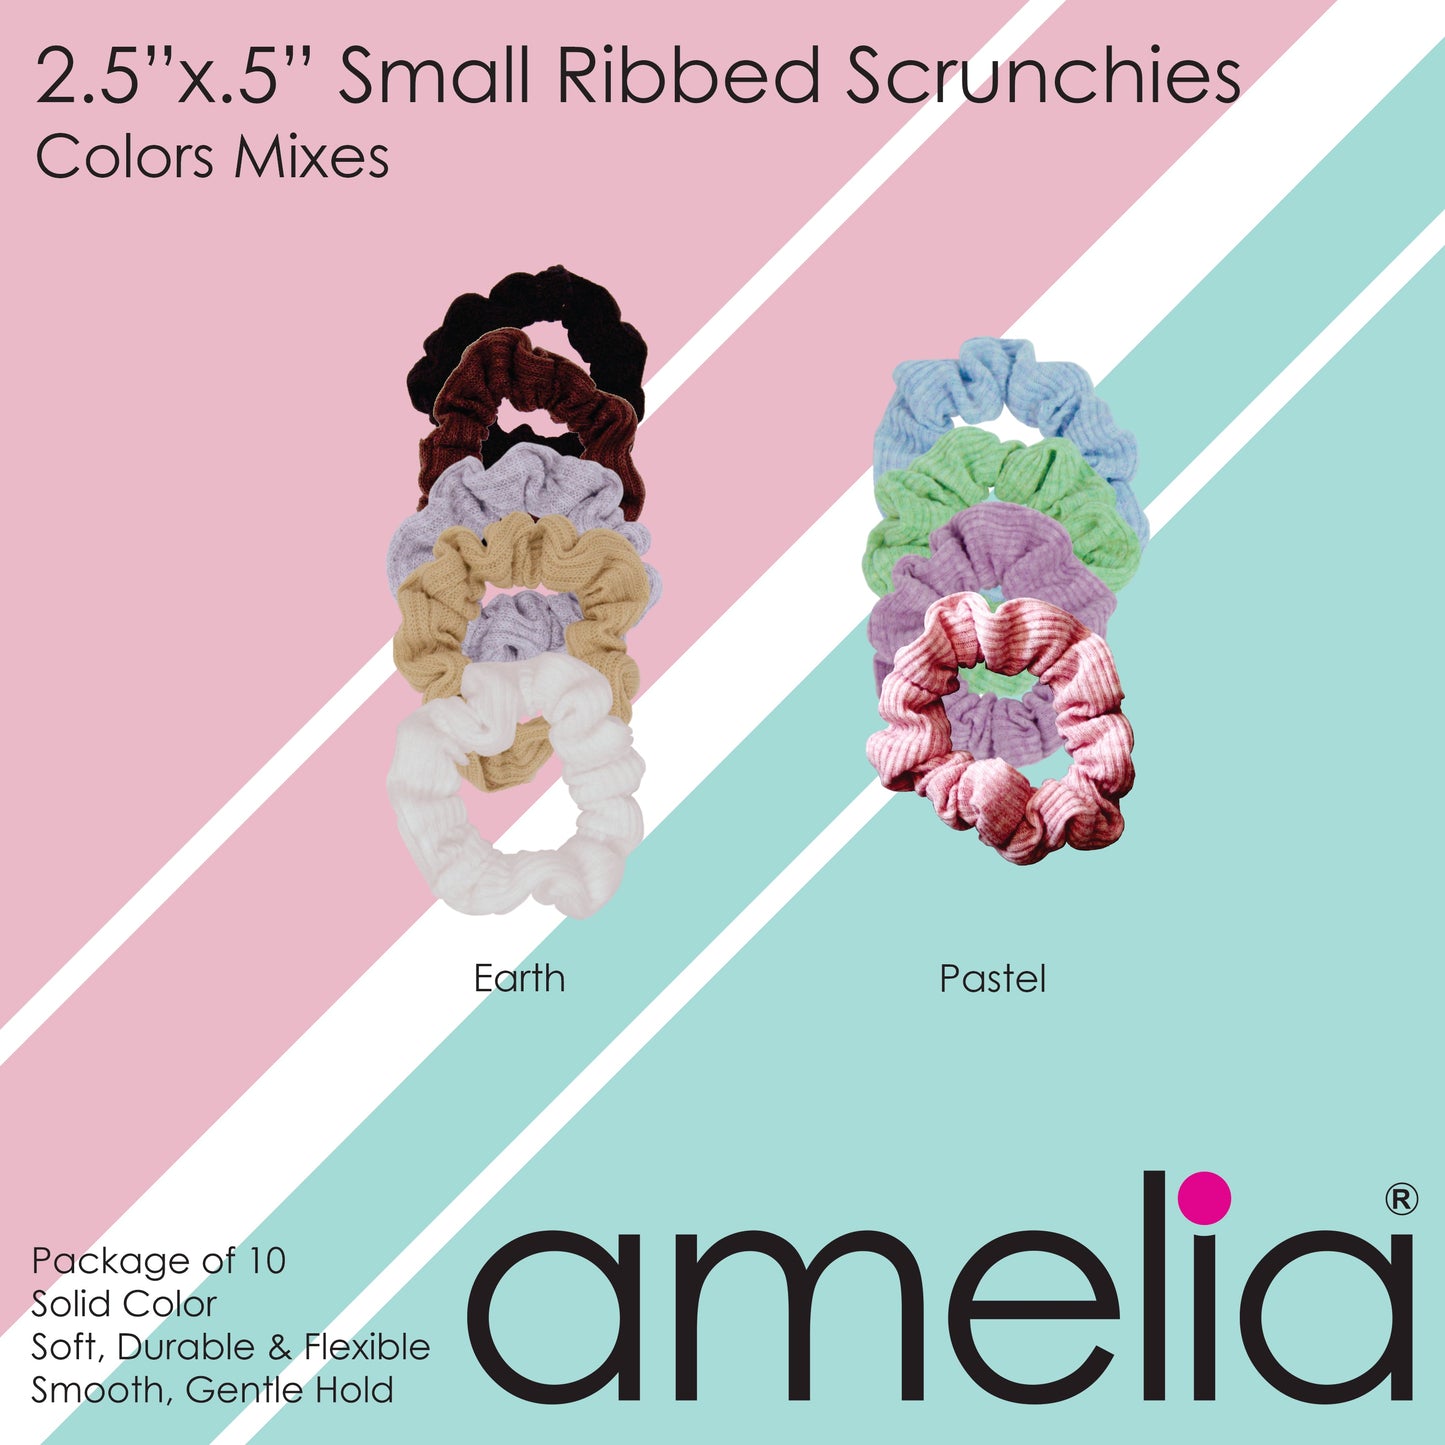 Amelia Beauty, Medium Gray Ribbed Scrunchies, 2.5in Diameter, Gentle on Hair, Strong Hold, No Snag, No Dents or Creases. 10 Pack